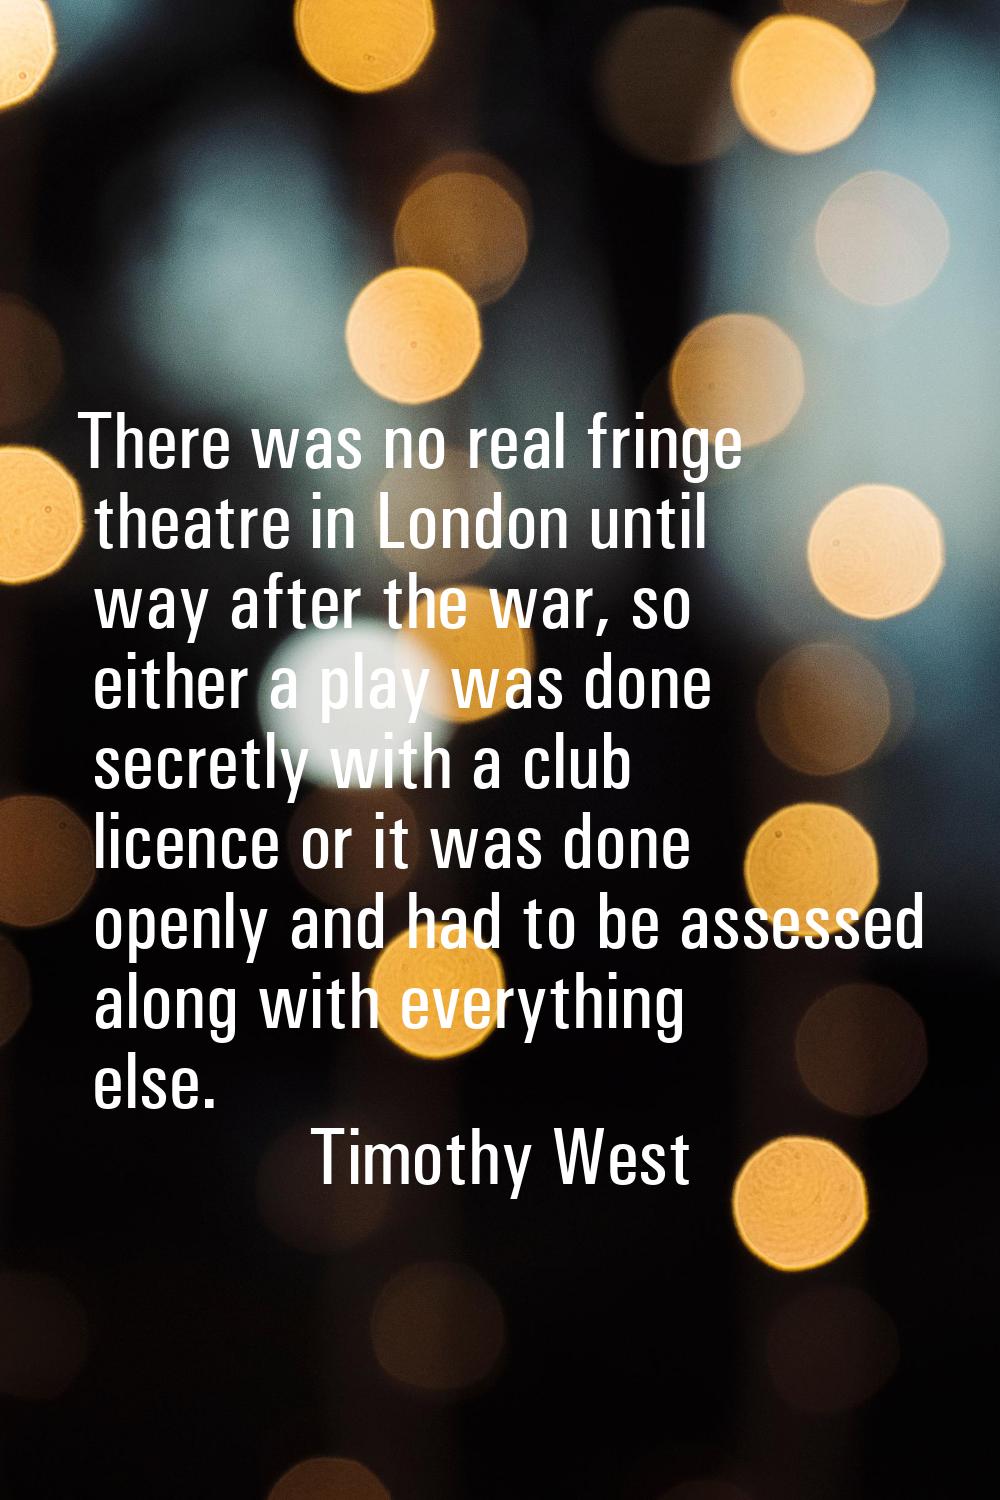 There was no real fringe theatre in London until way after the war, so either a play was done secre